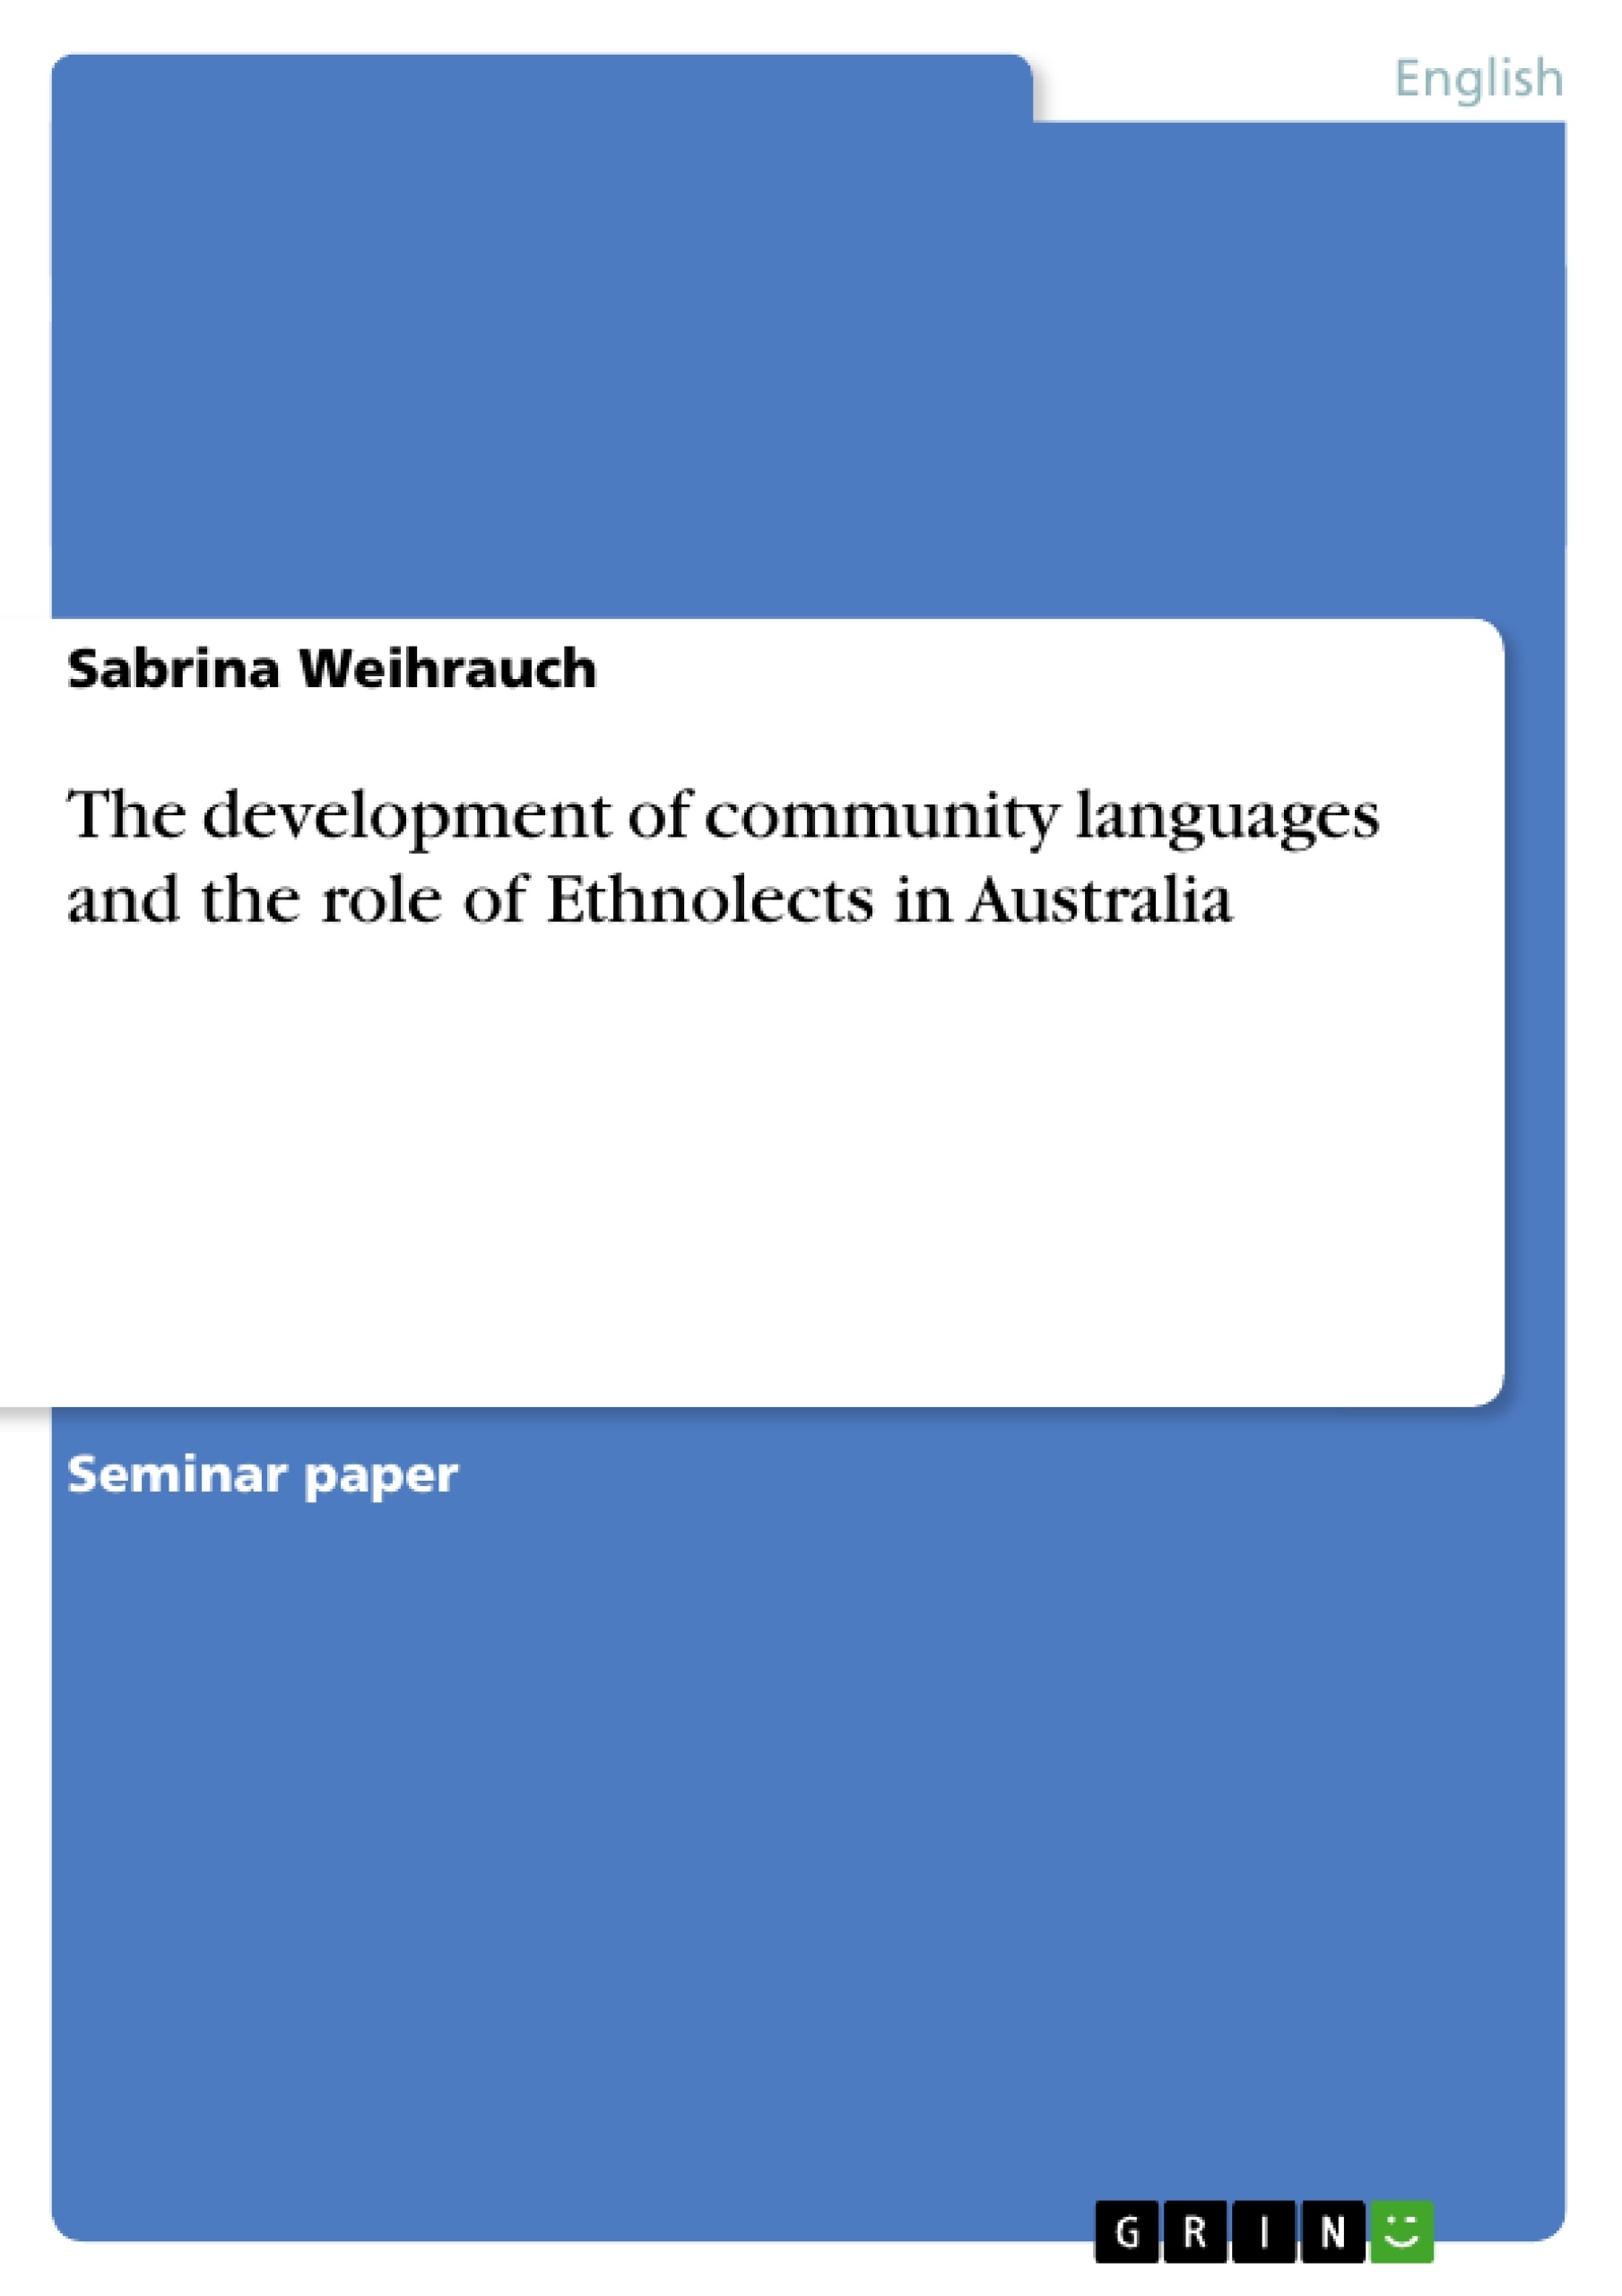 Título: The development of community languages and the role of Ethnolects in Australia 